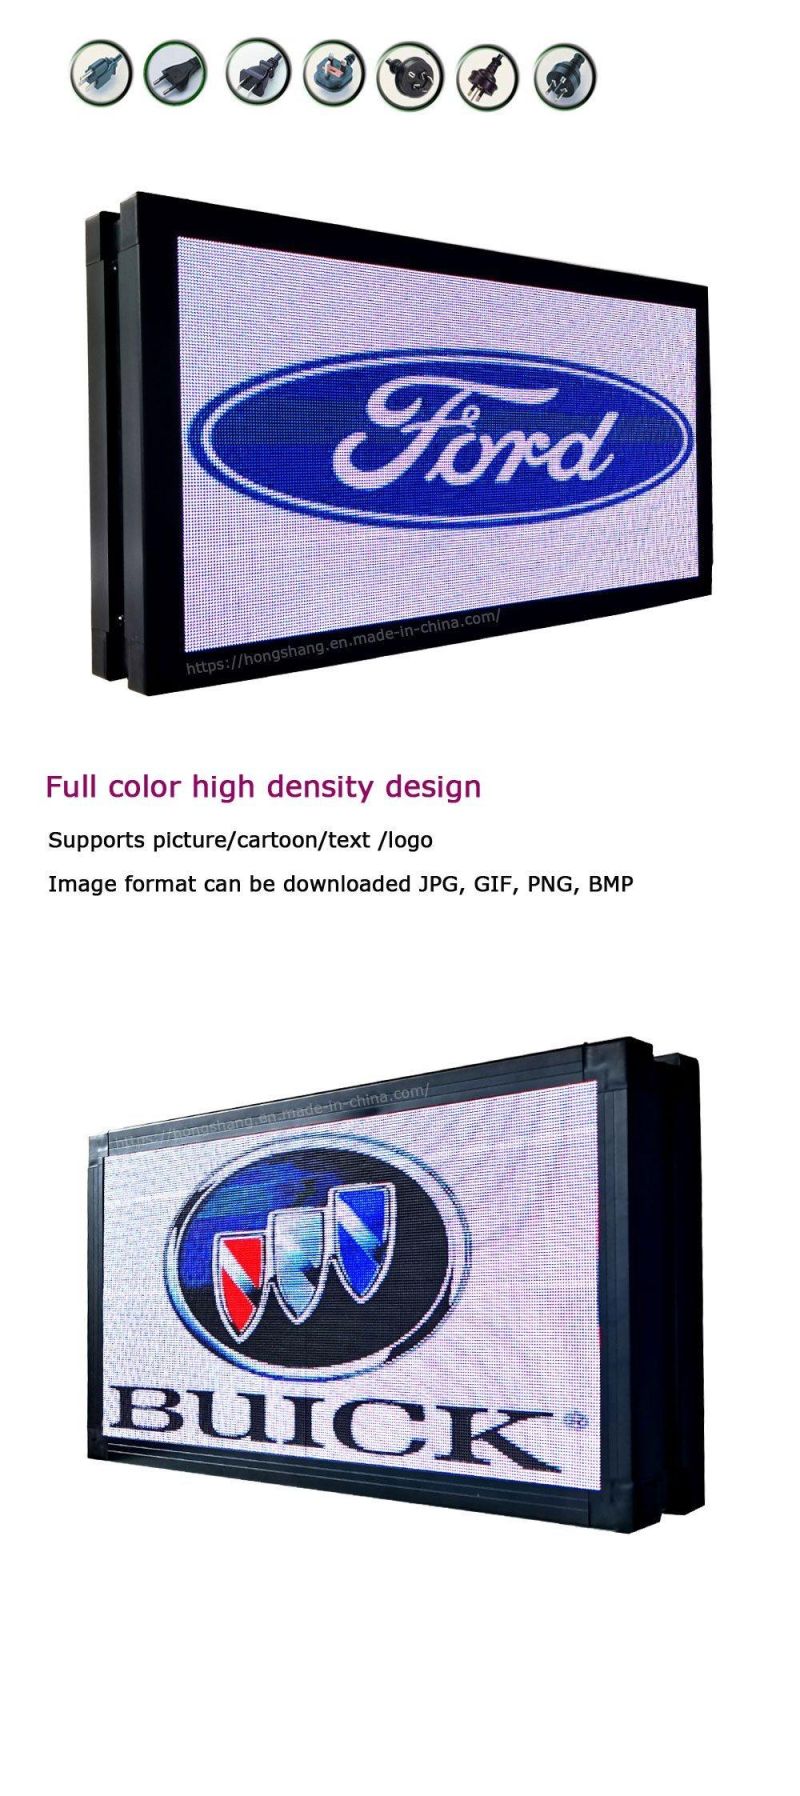 Indoor Commercial Video Promotion Double - Sided Advertising Display Board